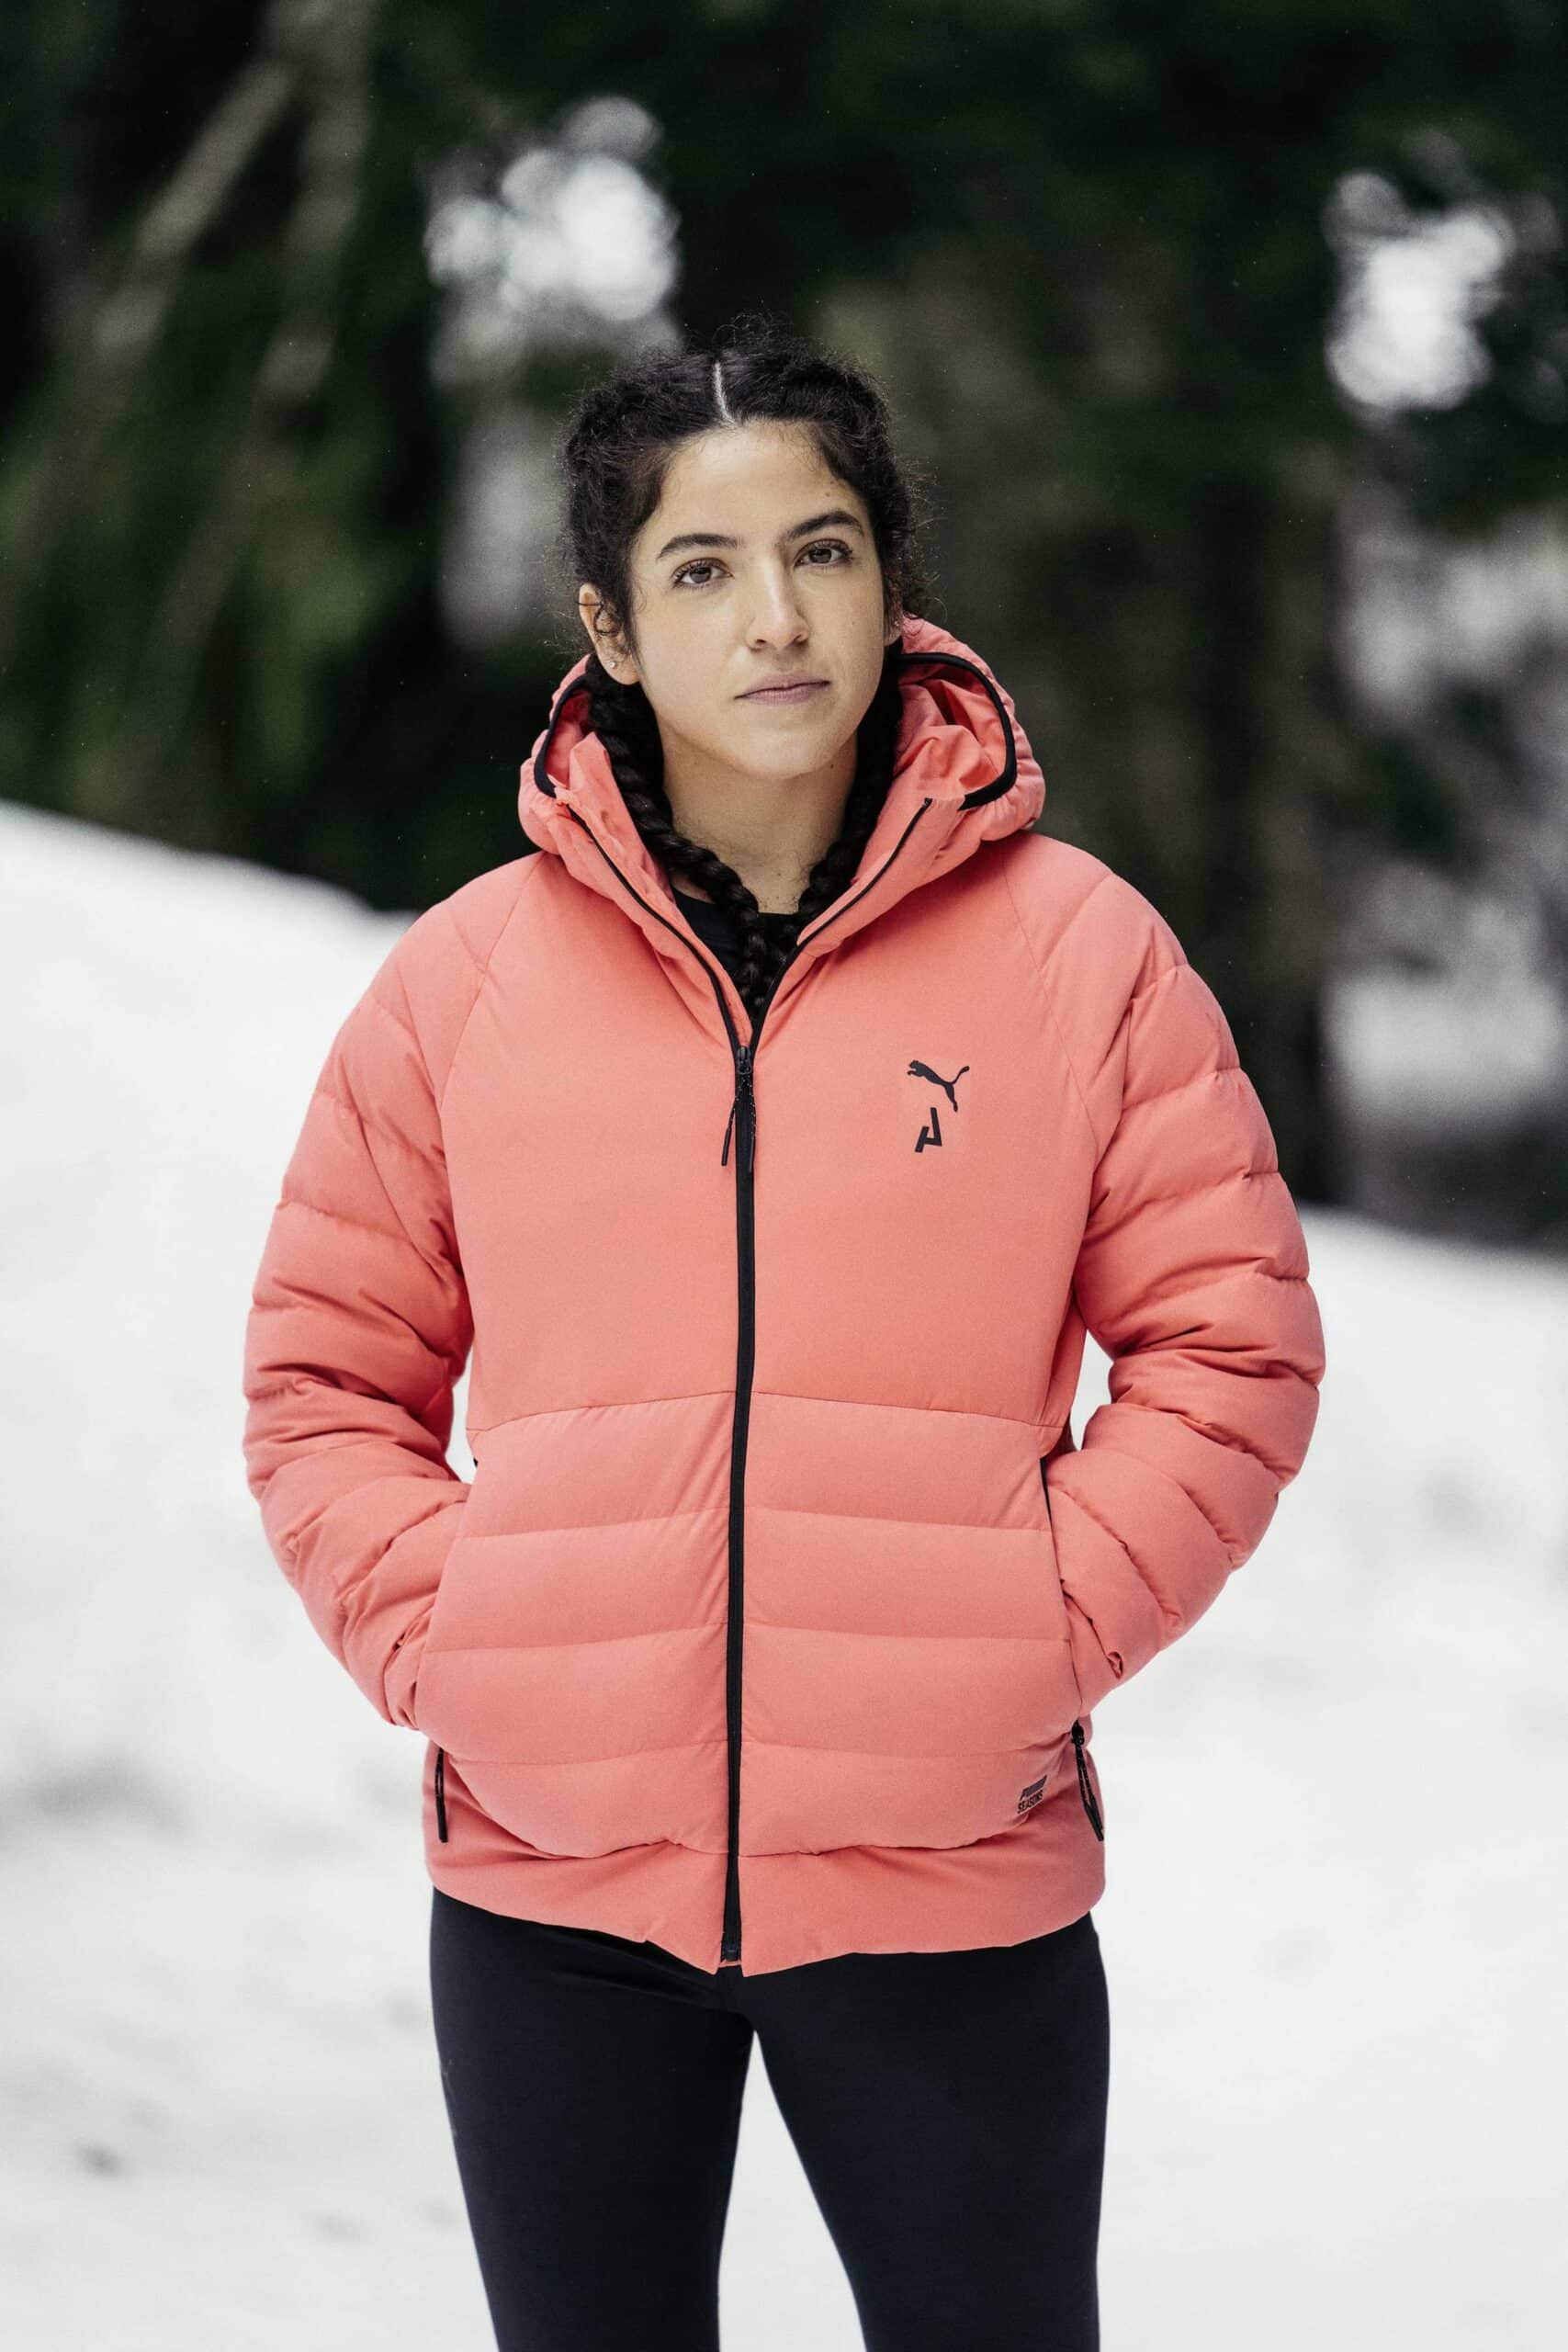 Puma athlete in winter 2022 collection_2